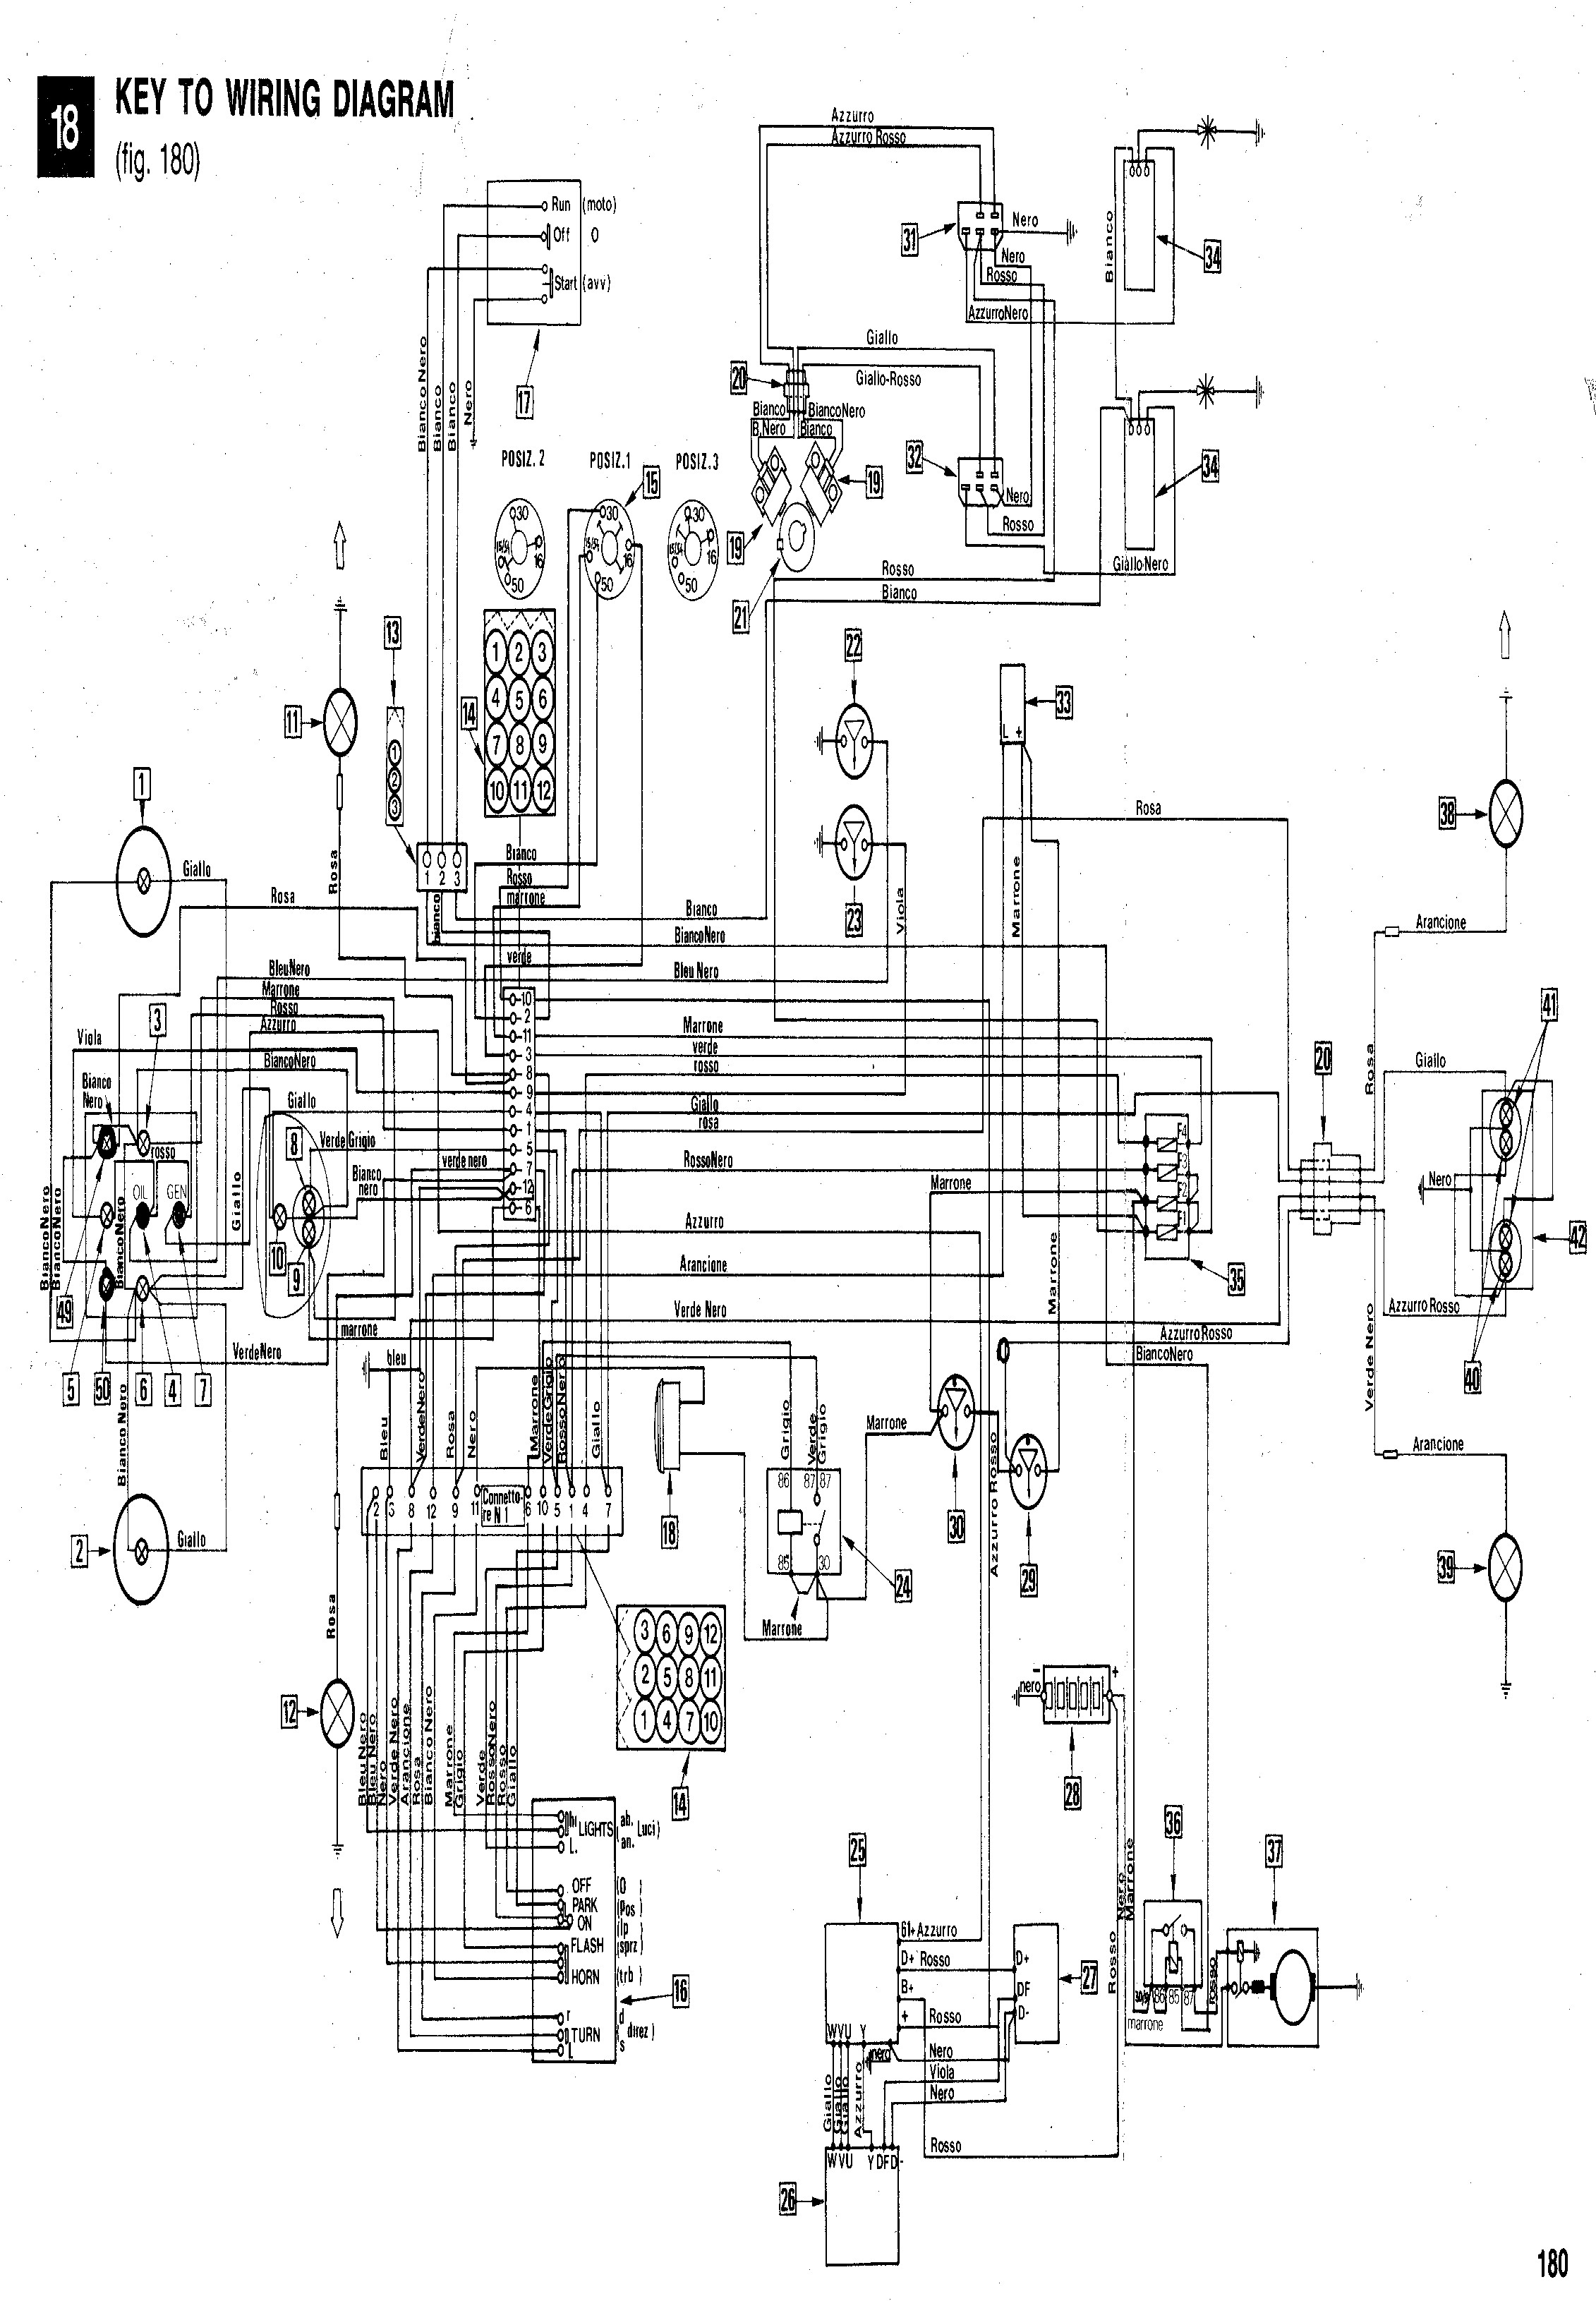 Honda Xl 250 Wiring Diagram Euro Spares the High Performance or at Least Higher Performance Of Honda Xl 250 Wiring Diagram